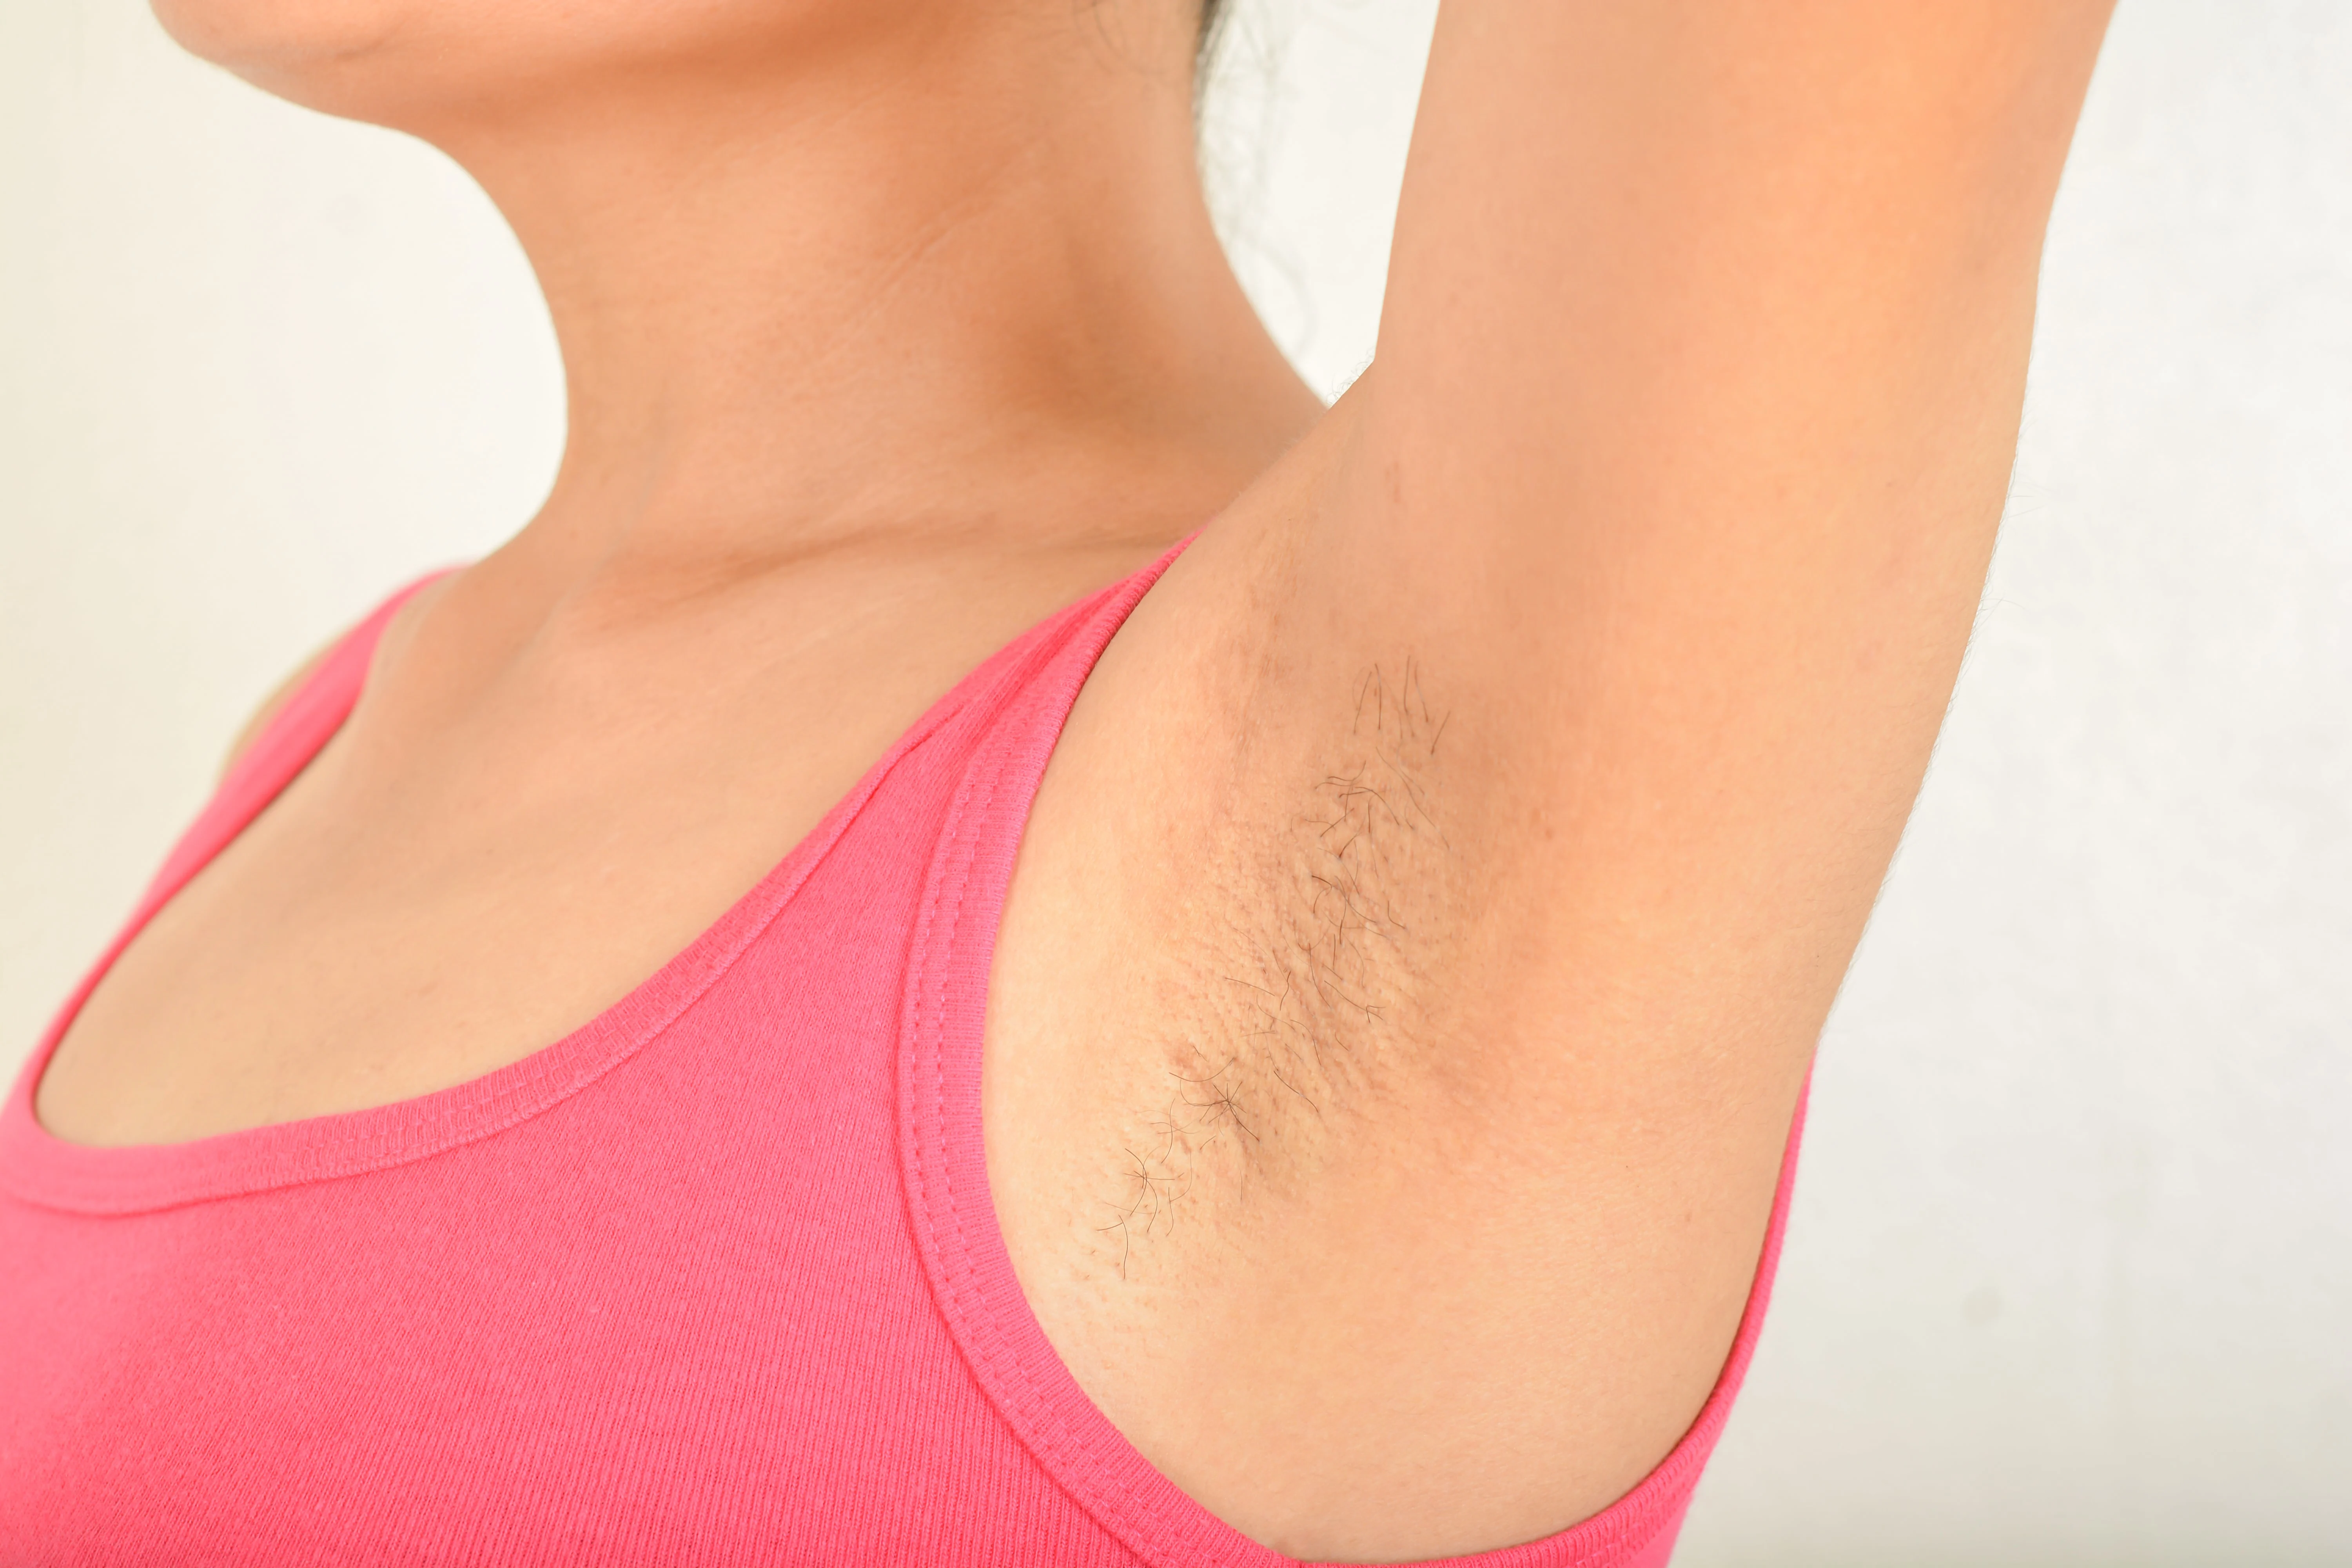 Women's armpit with hair on it